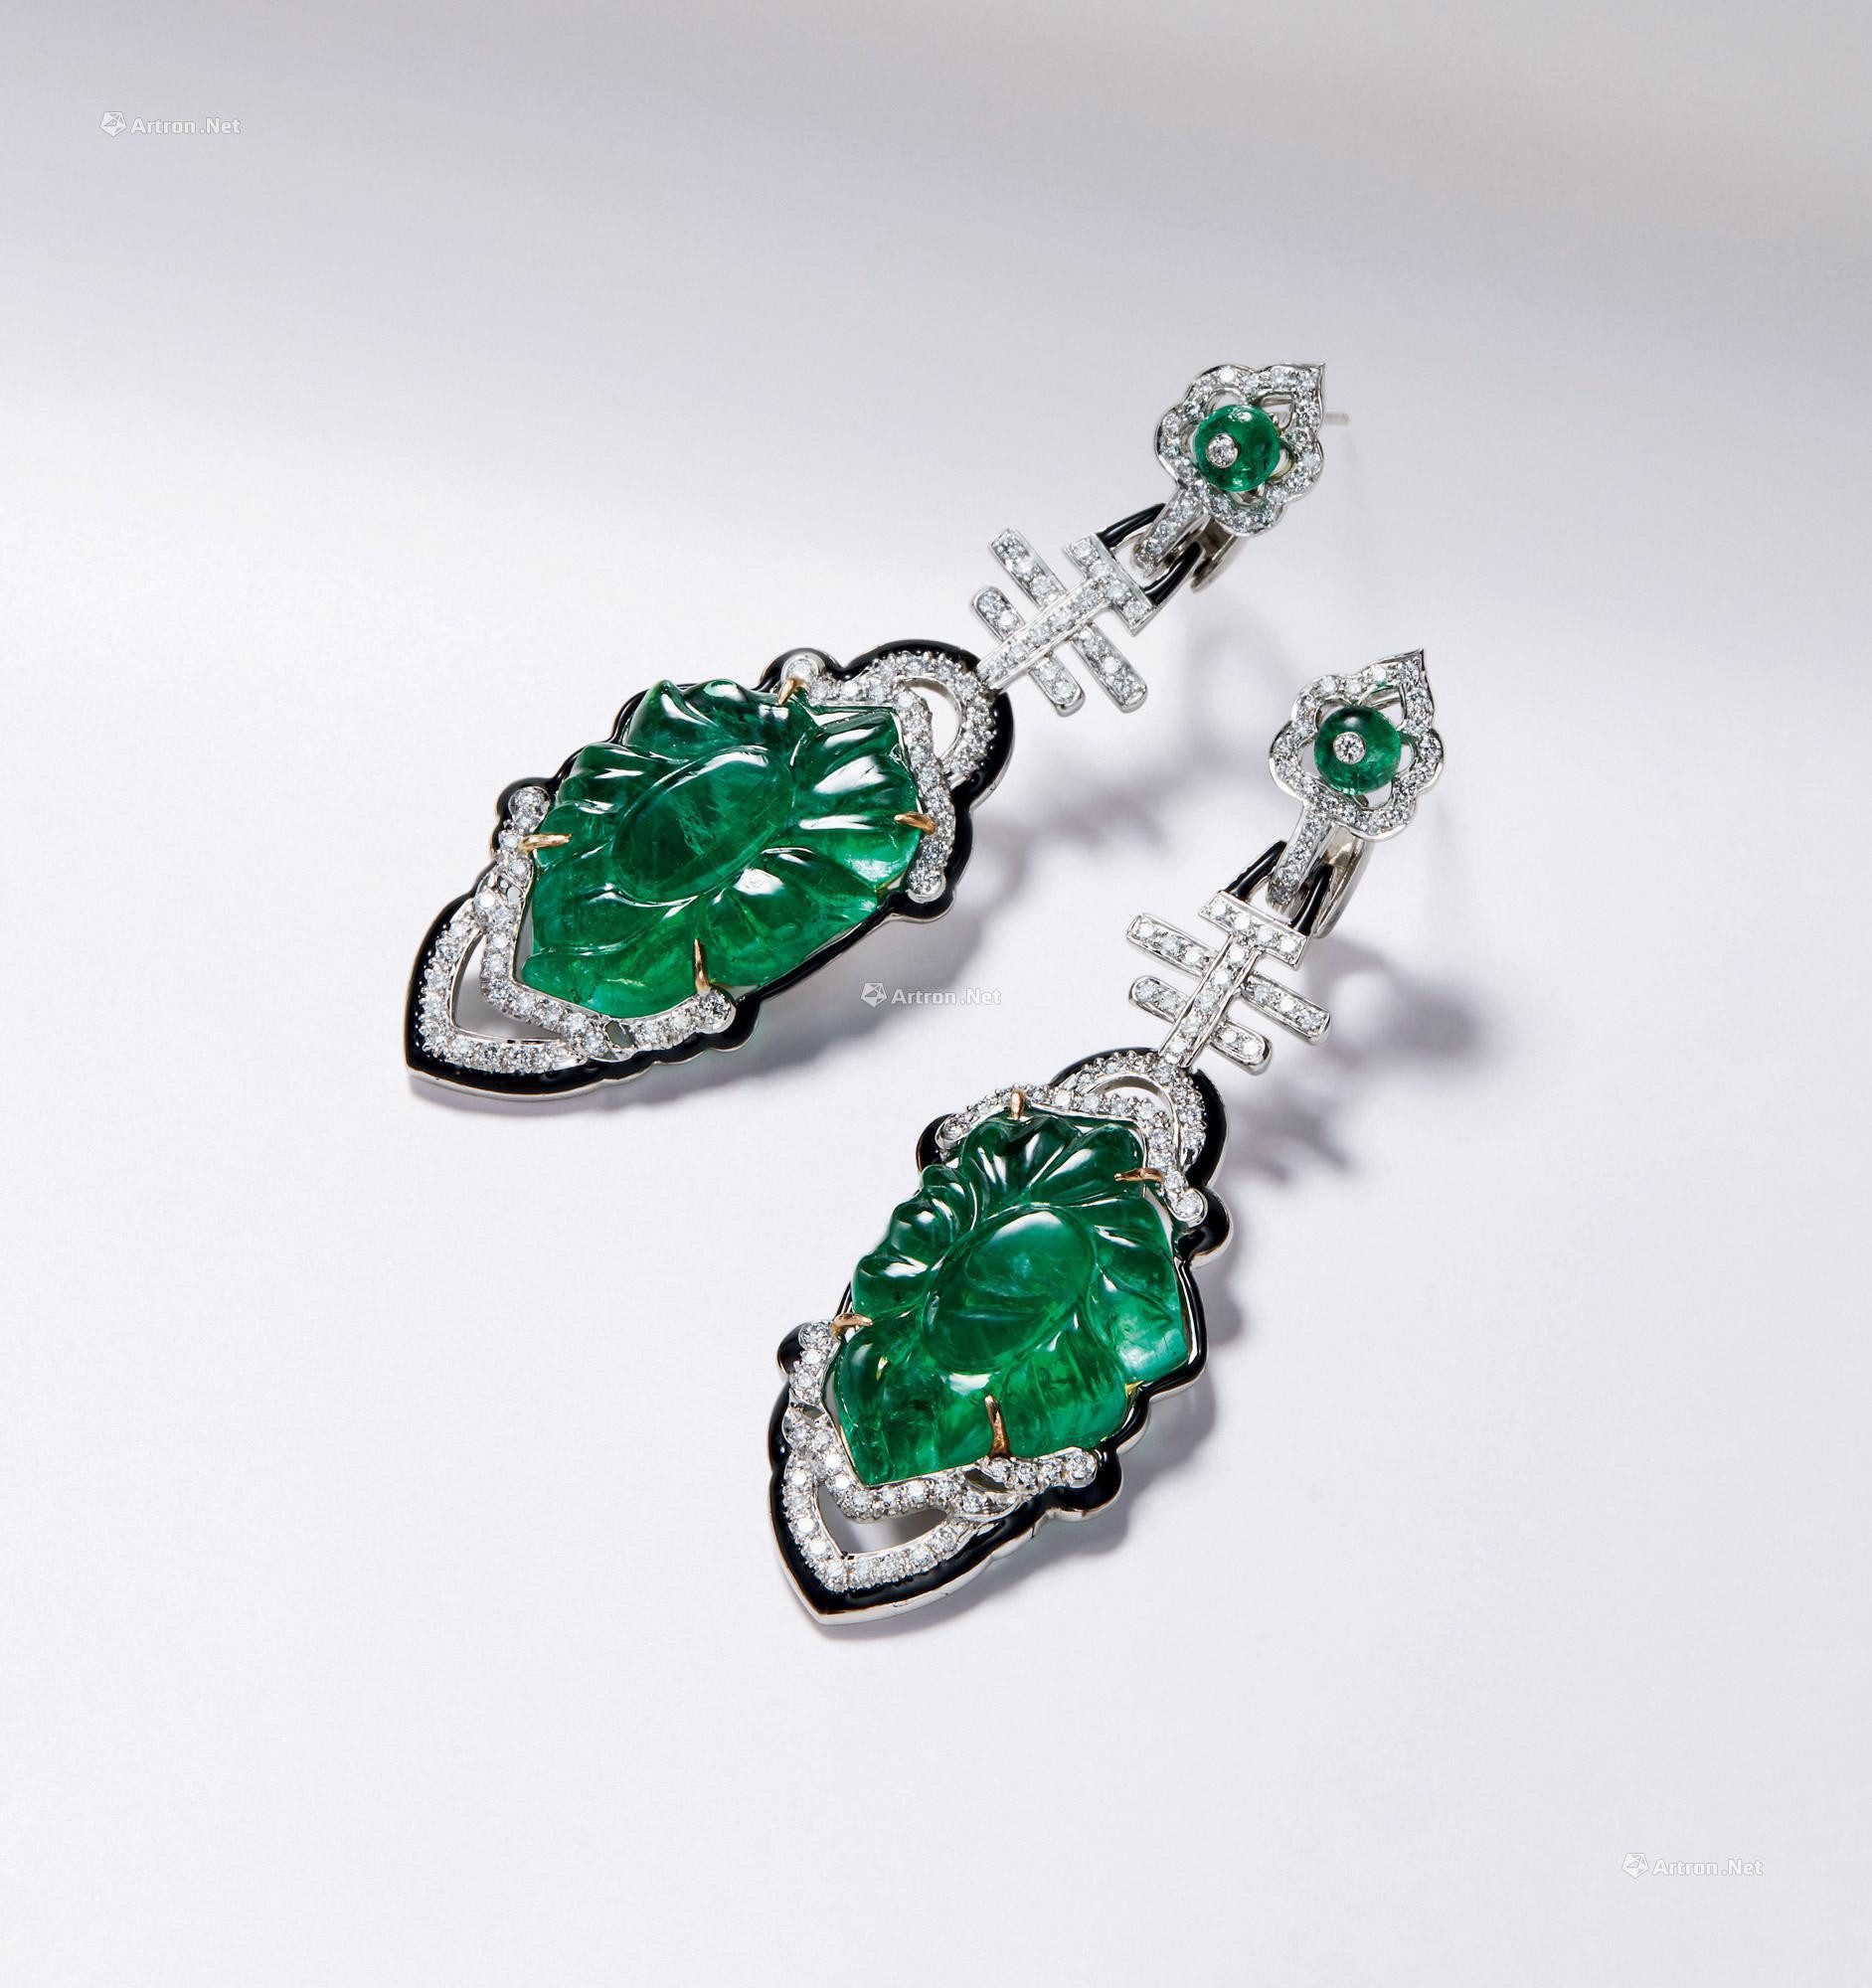 A PAIR OF EMERALD，DIAMOND AND BLACK AGATE EAR PENDANTS MOUNTED IN 18K WHITE GOLD